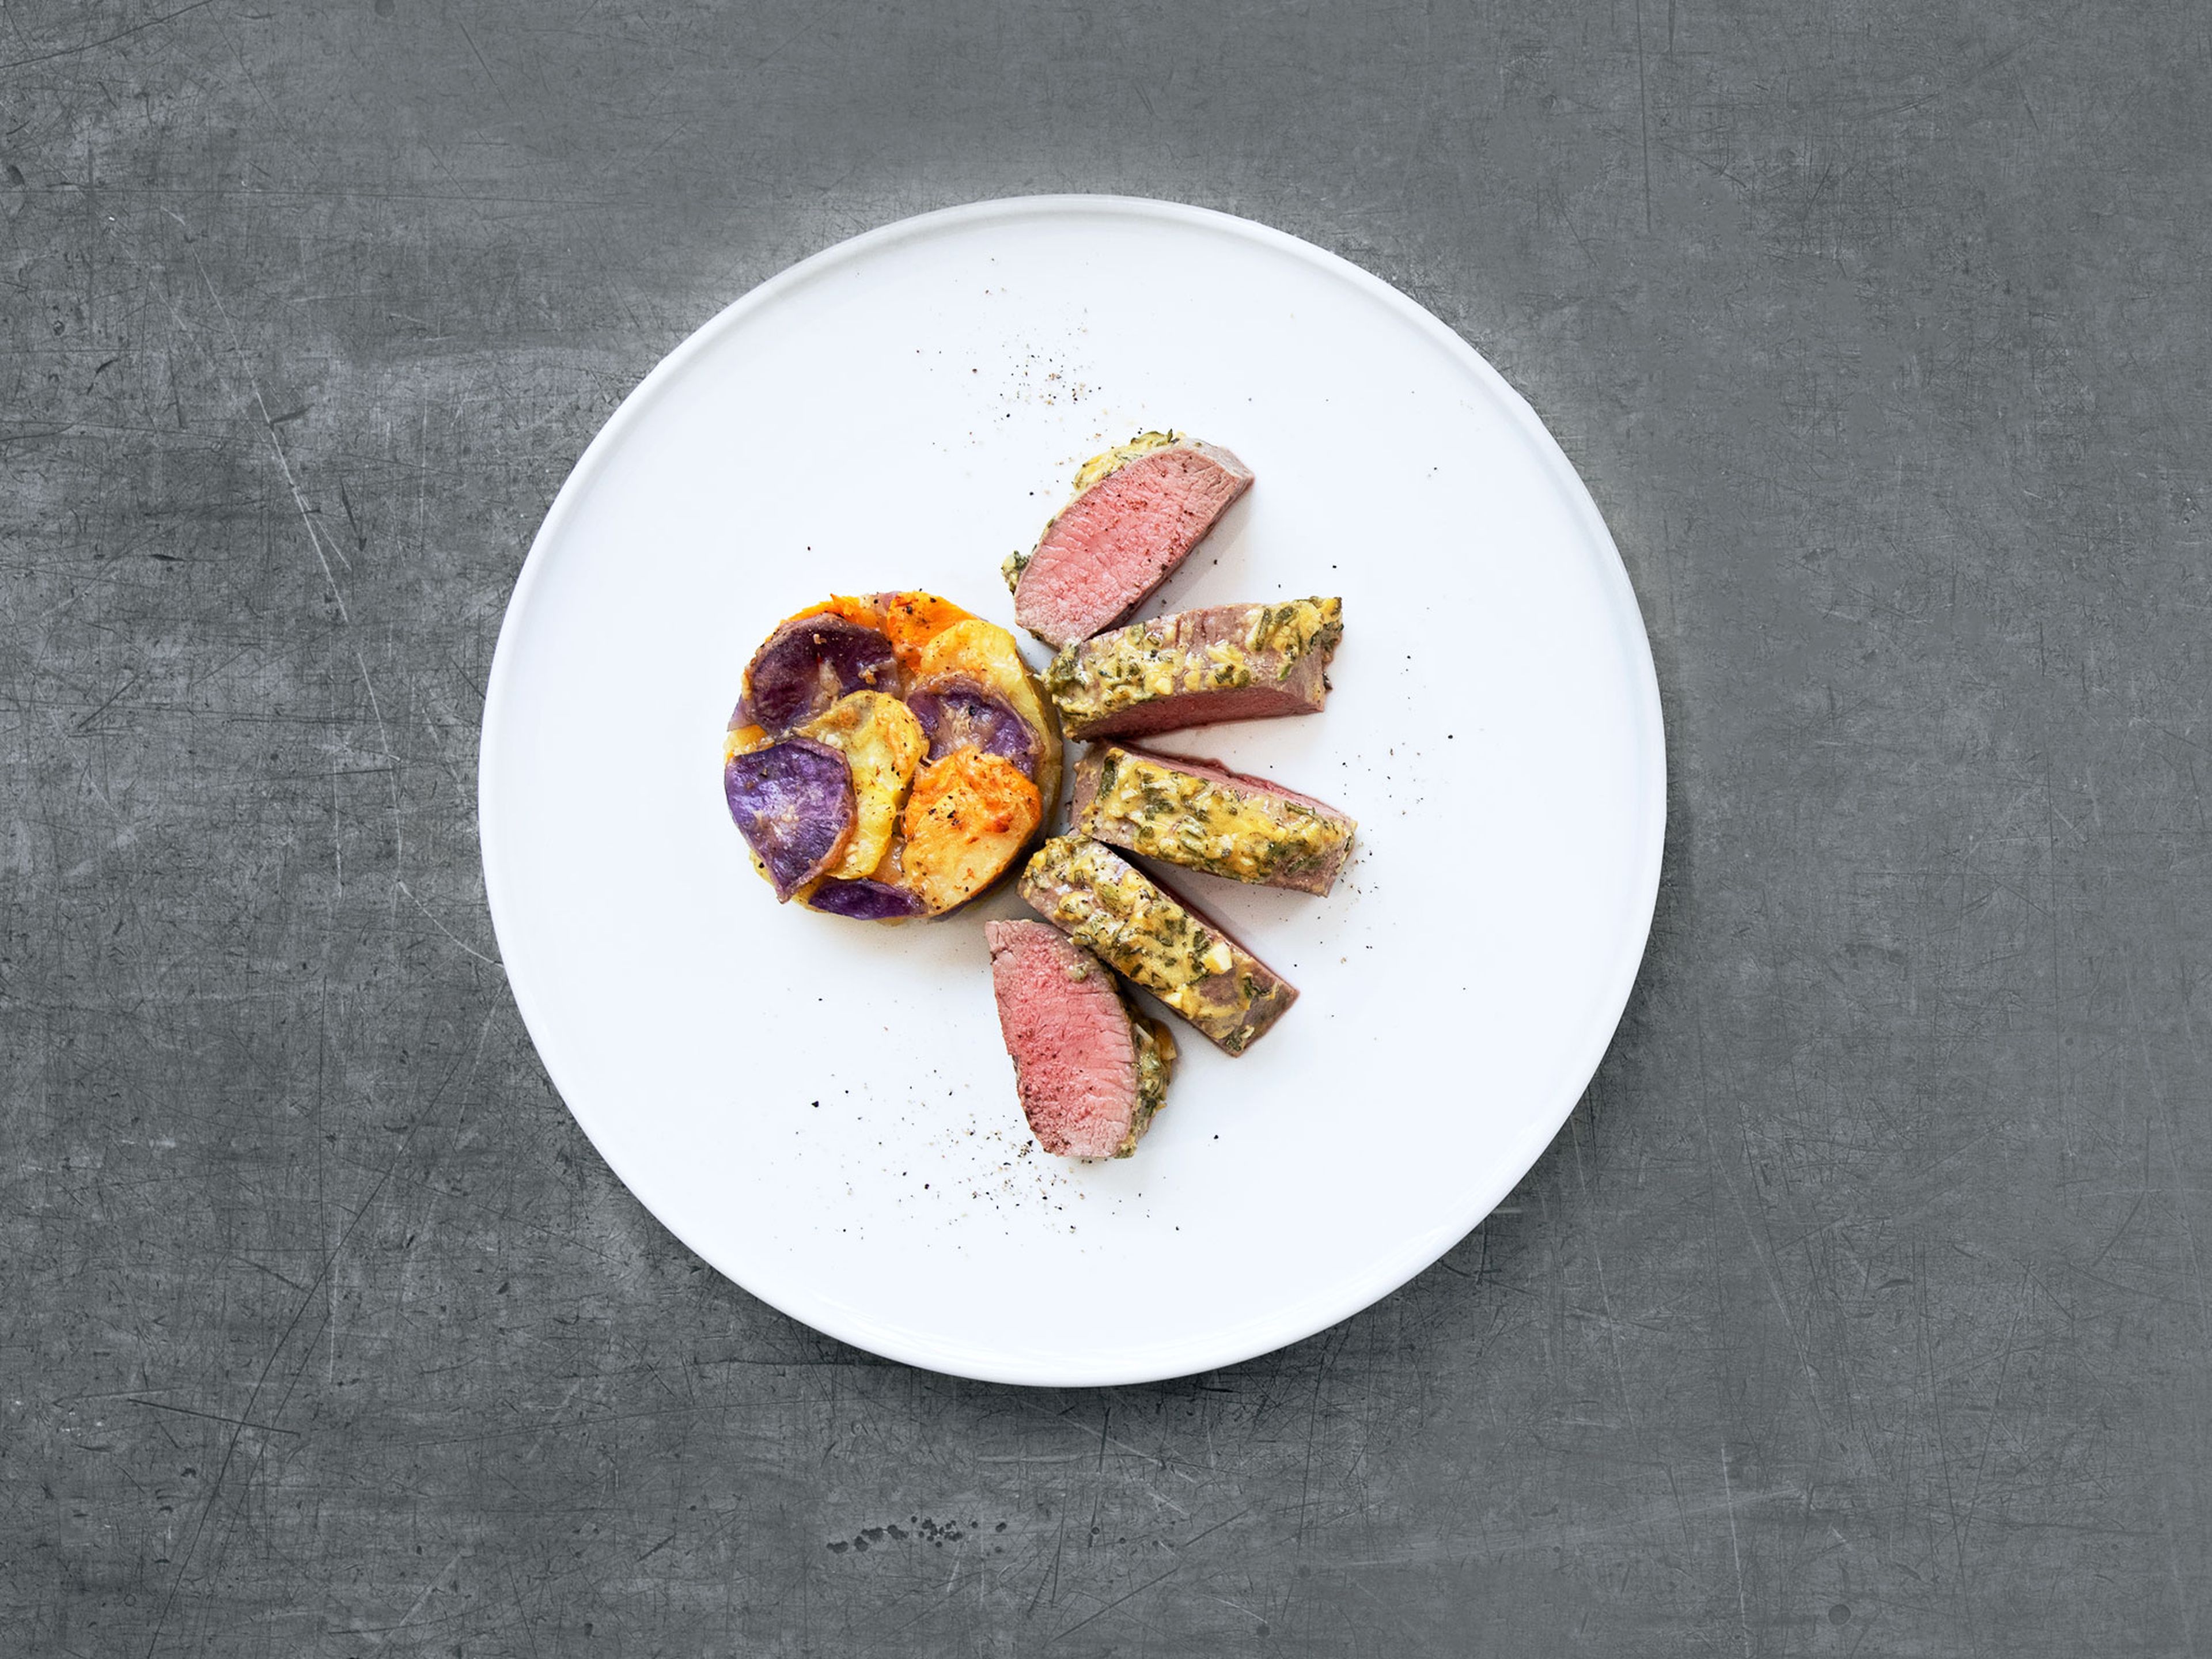 Oven-baked saddle of lamb with mustard-herb crust